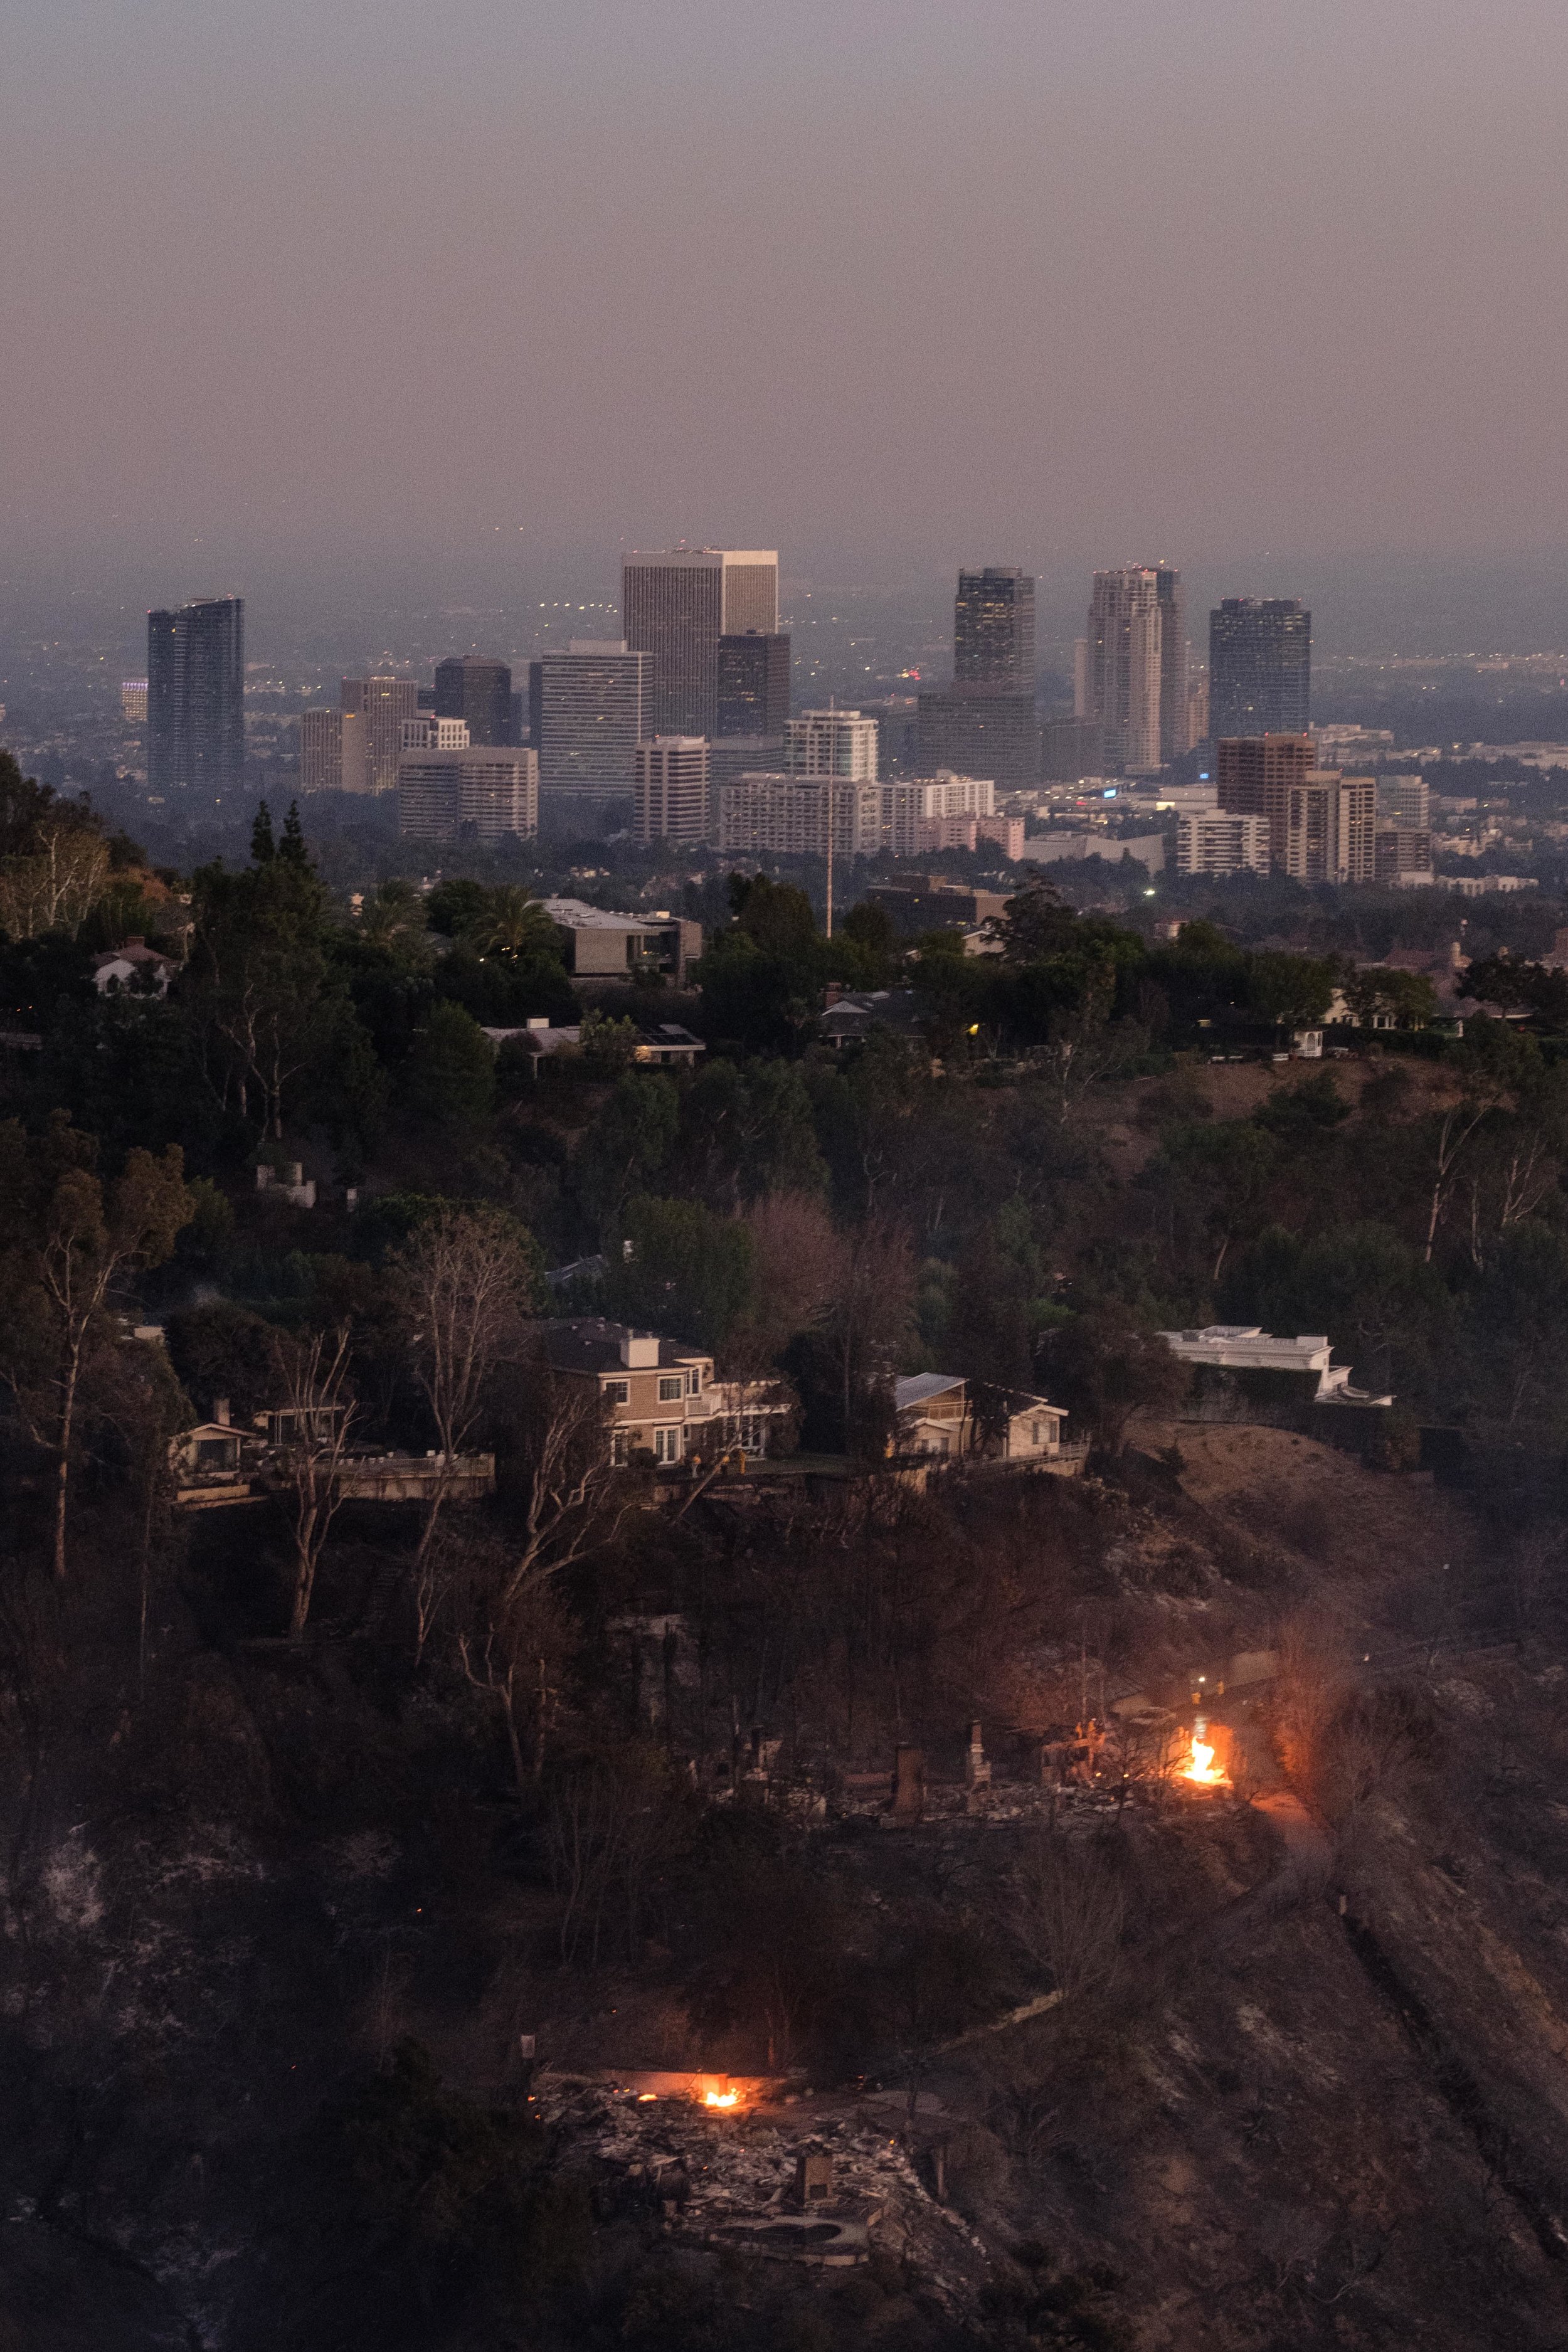  Houses turned to rubble by the Skirball Fire that started in the early morning in Los Angeles, Calif. On Dec. 6, 2017. (Photo by Jayrol San Jose) 